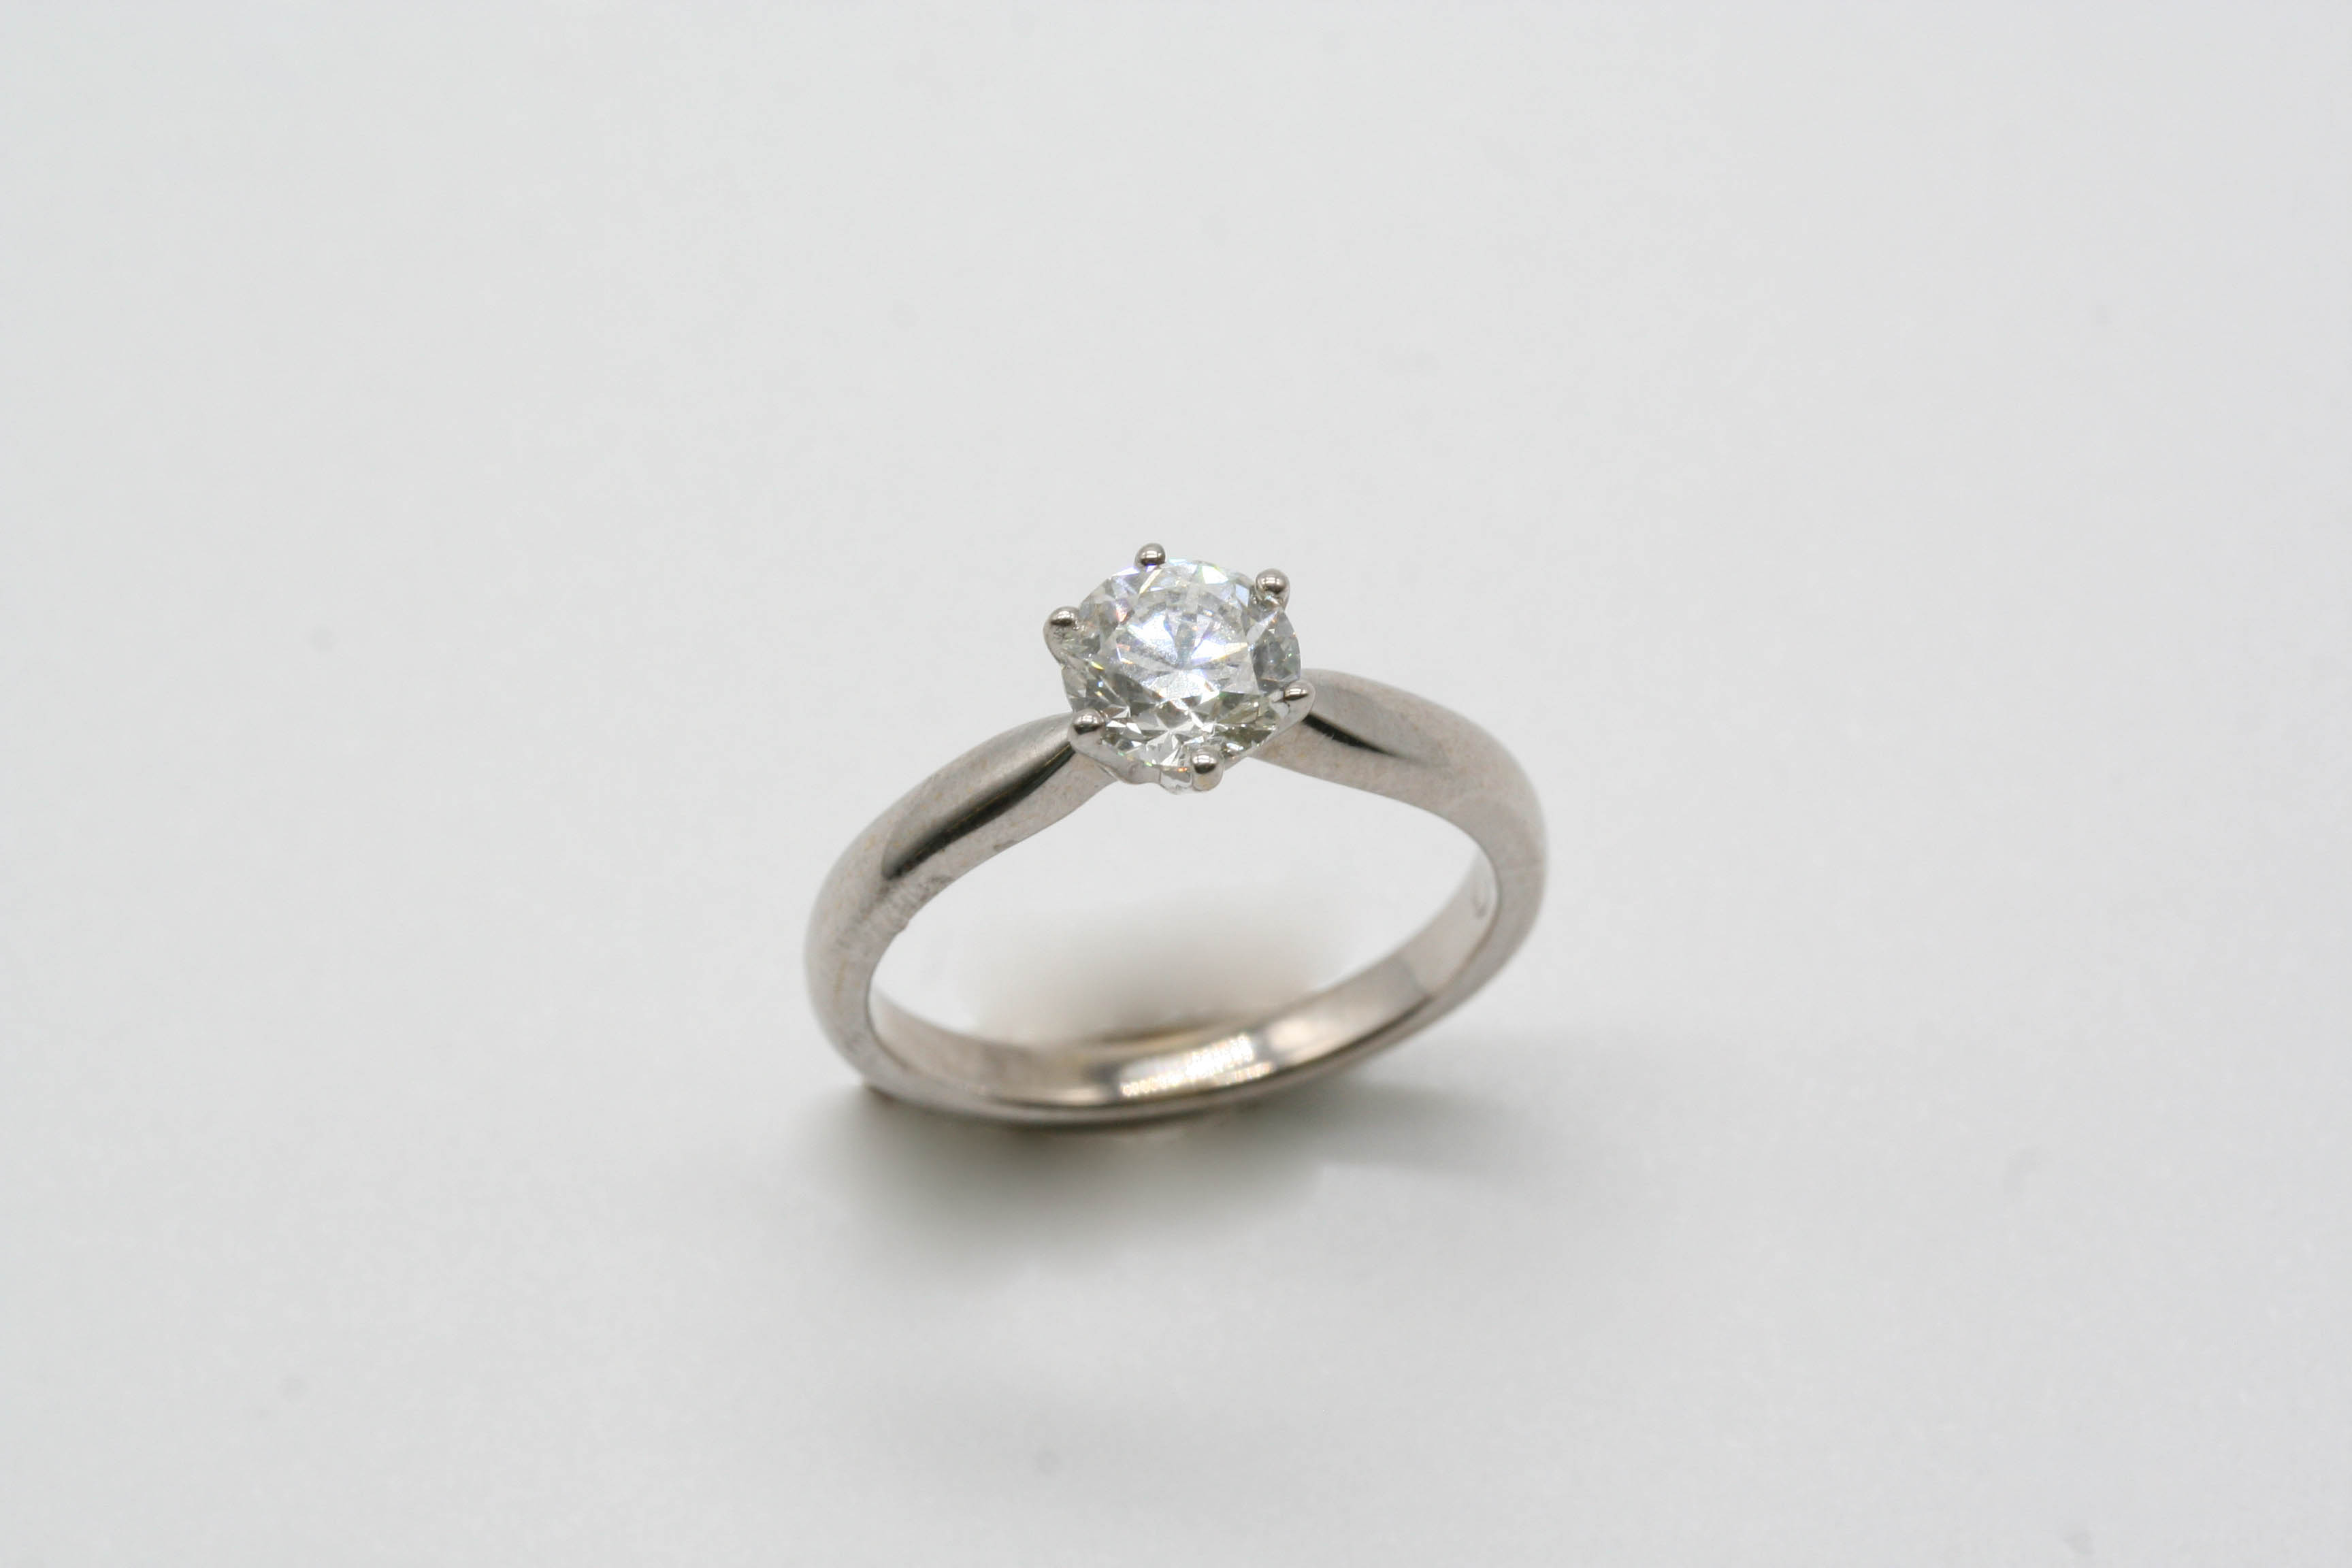 A DIAMOND SOLITAIRE RING the round brilliant-cut diamond weighs approximately 1.00 carats and is set